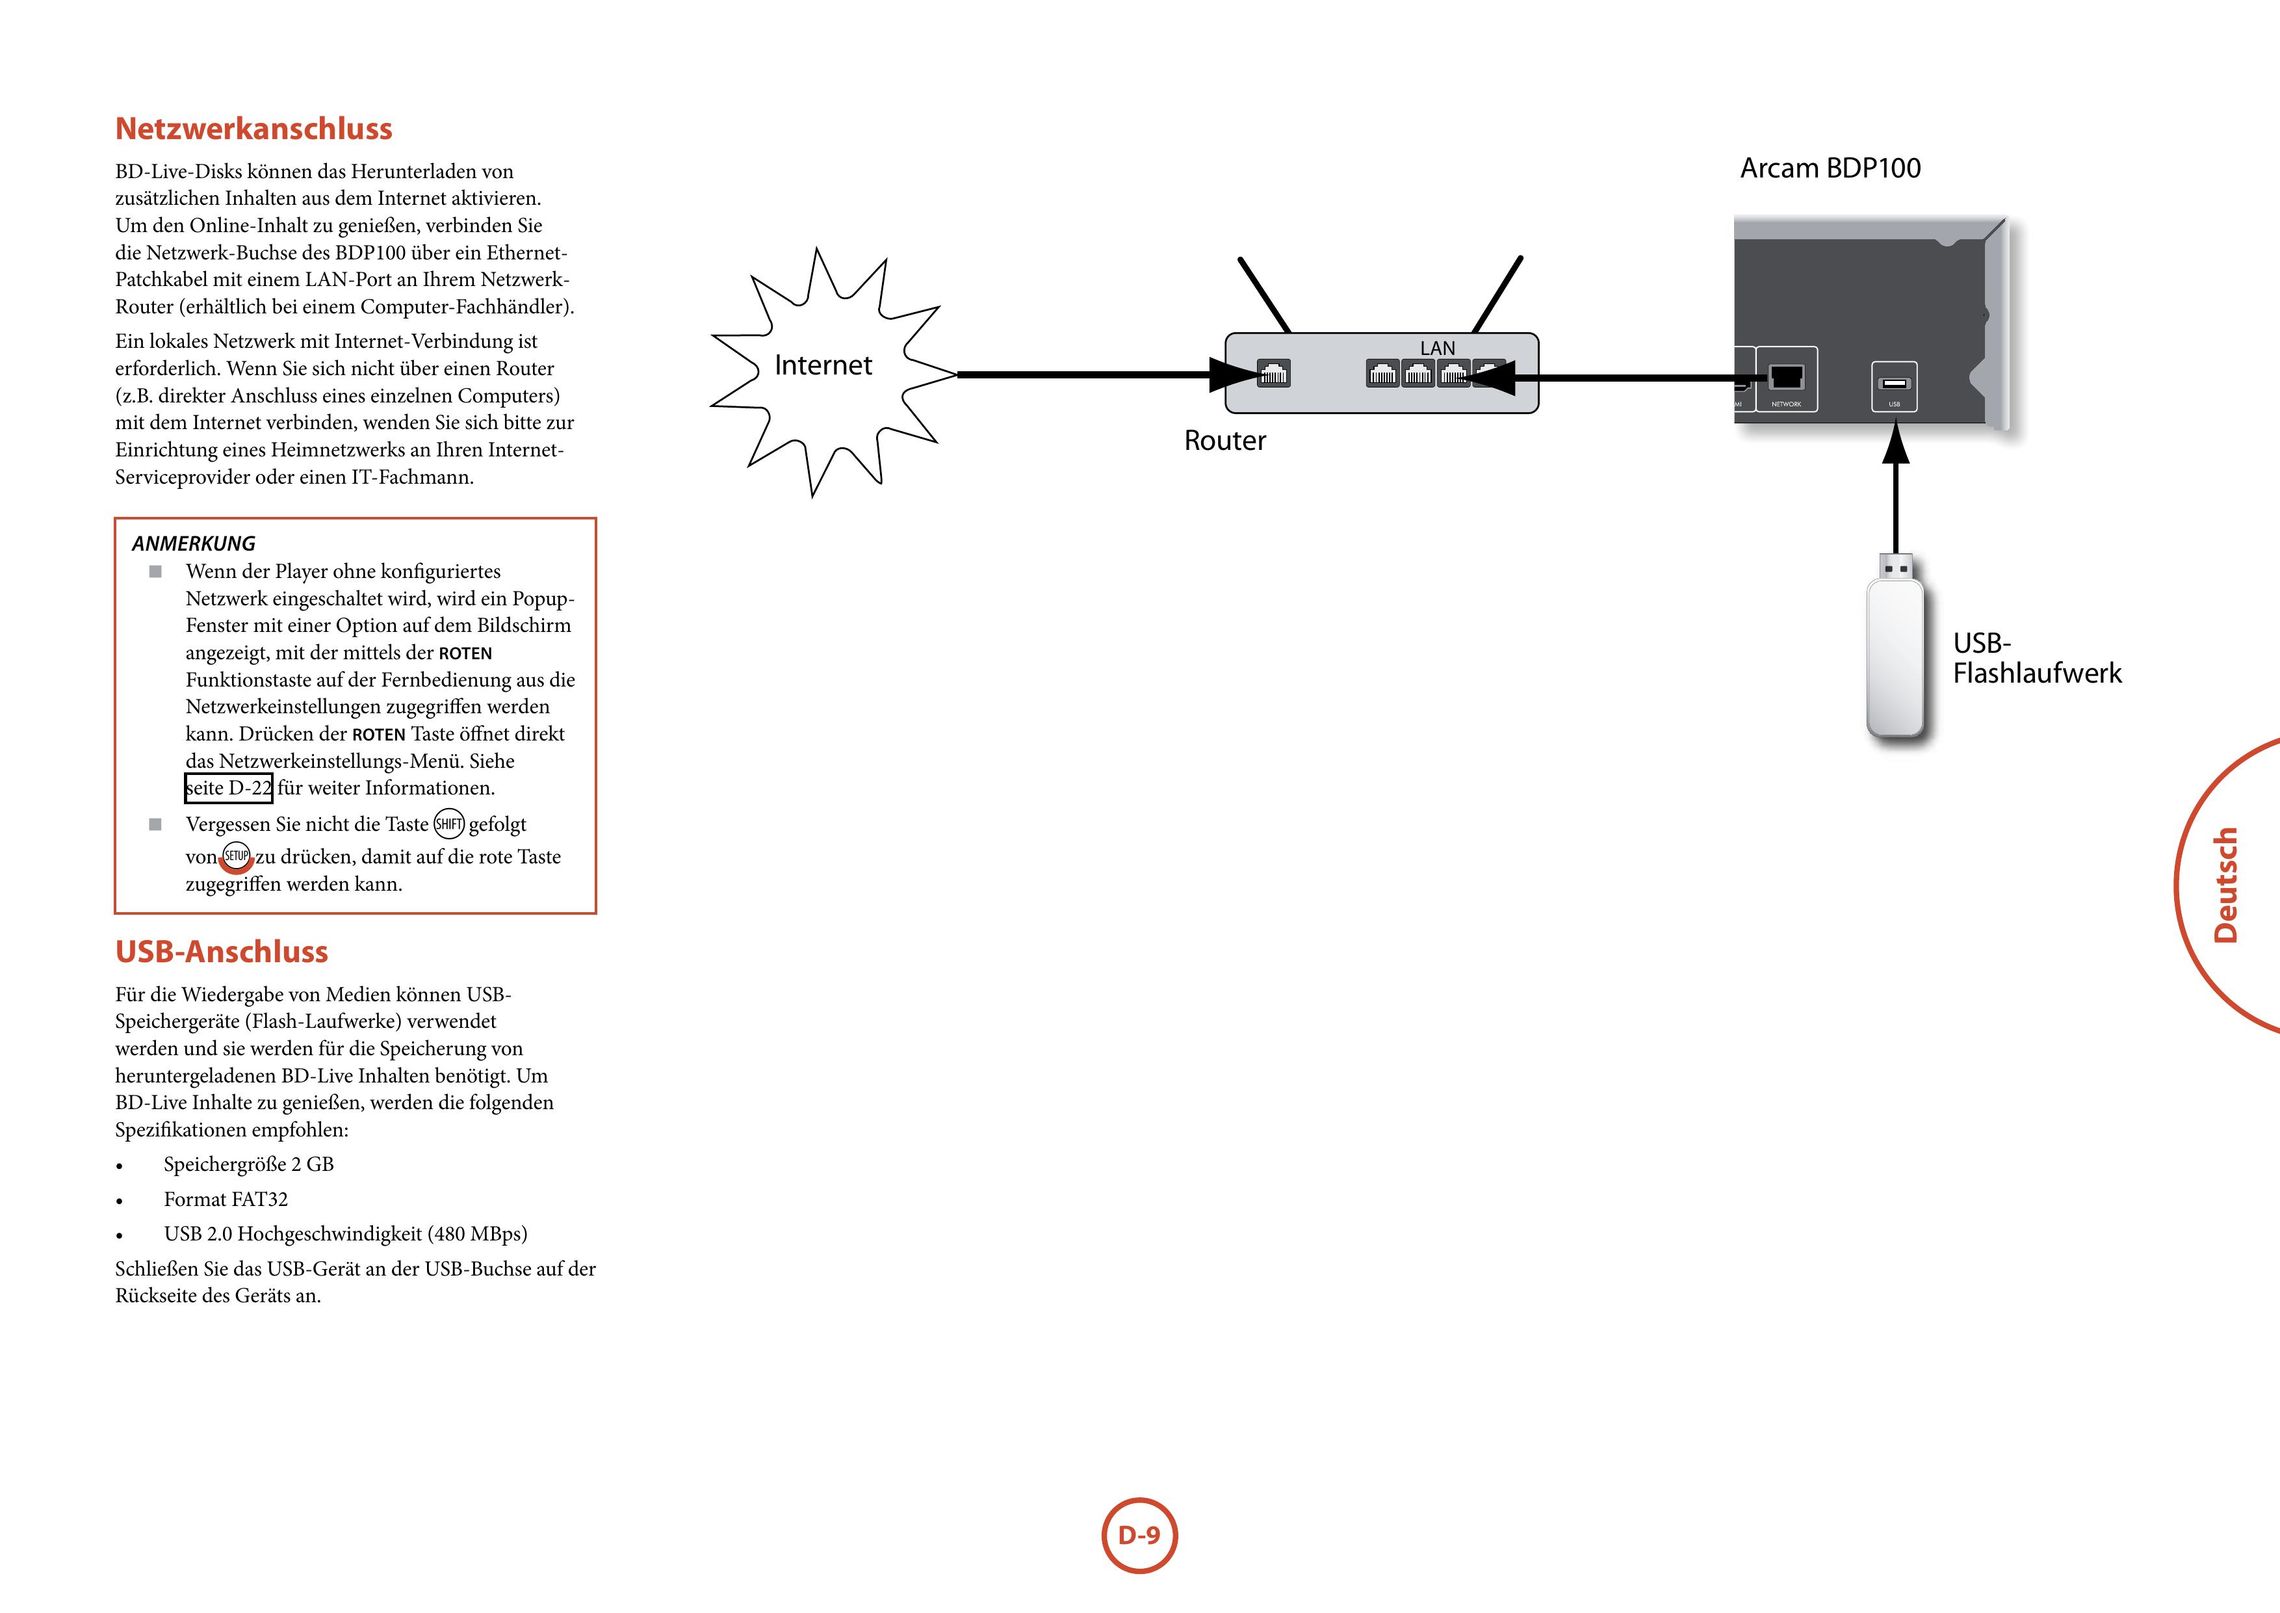 Arcam BDP100 Blu-ray Player User Manual (Page 81)